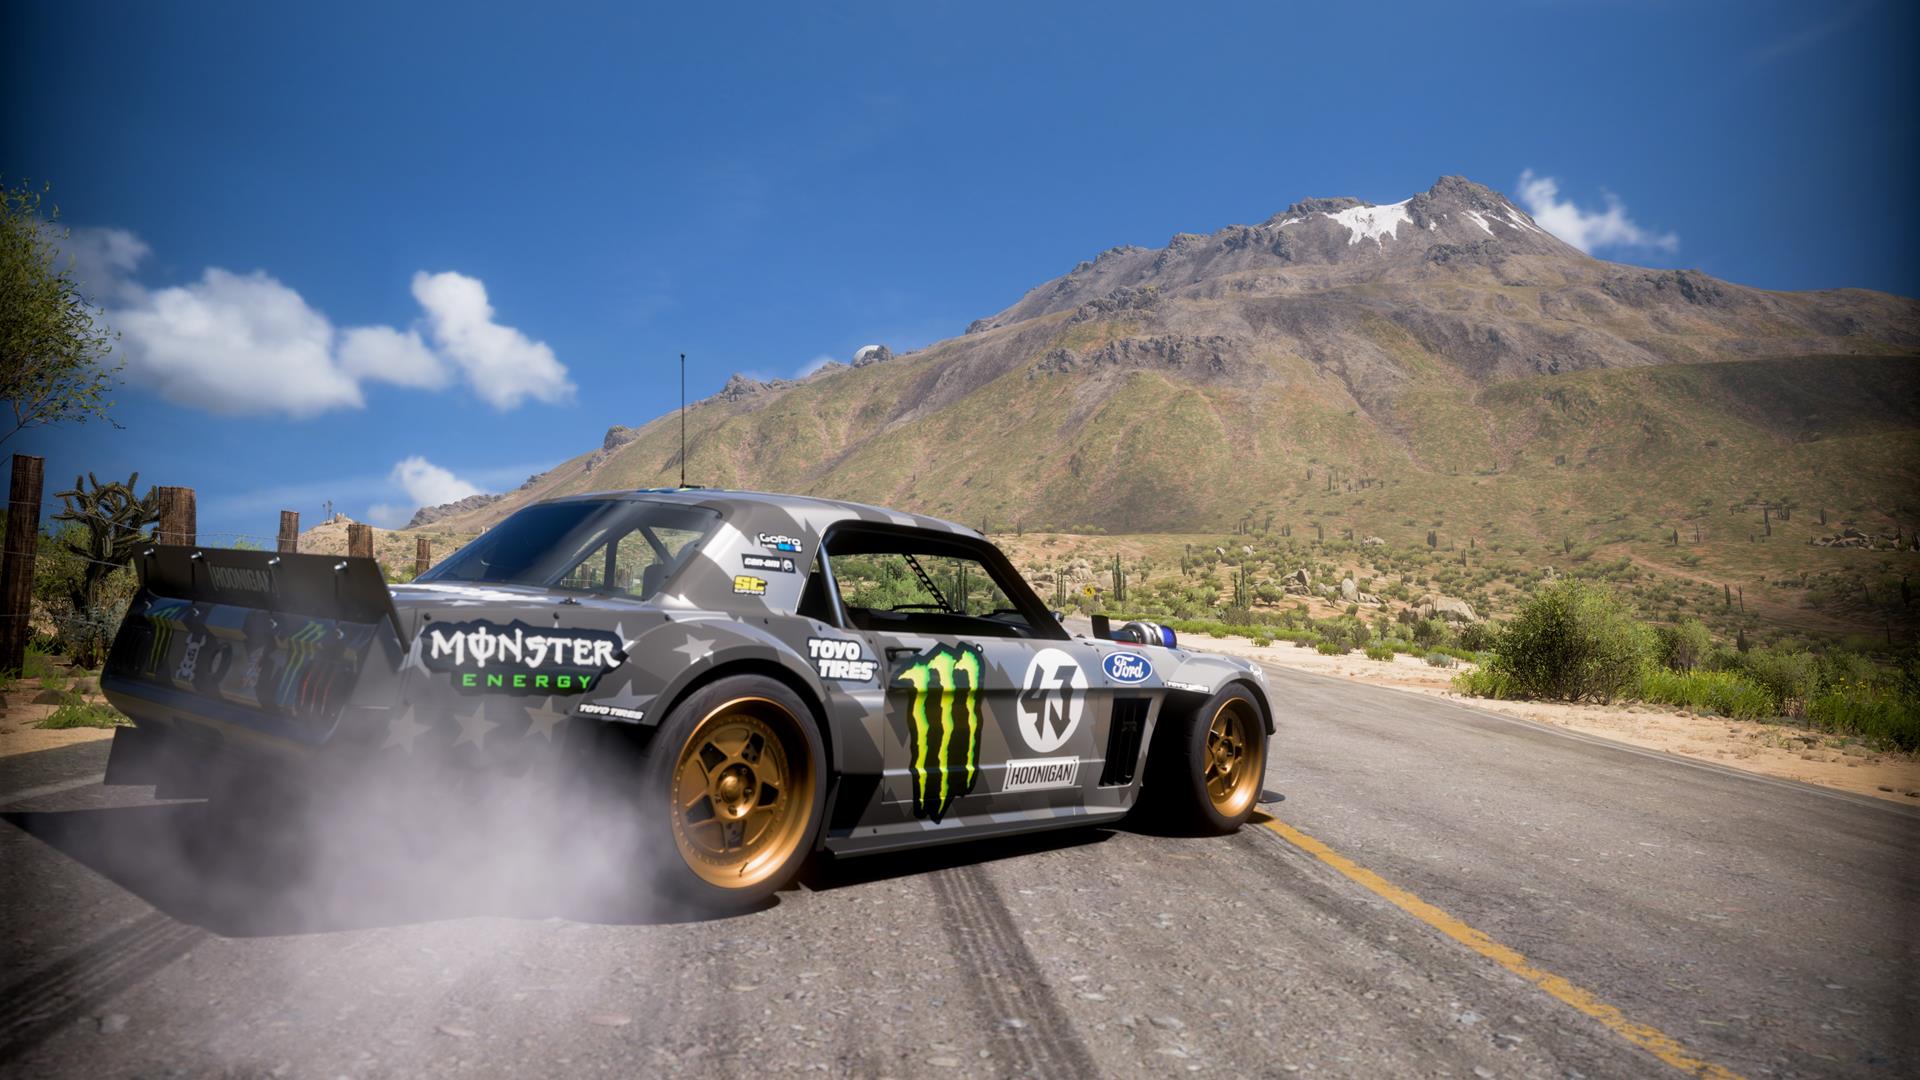 Forza Face-Off: Motorsport vs Horizon - Which Racing Giant Reigns Supreme?